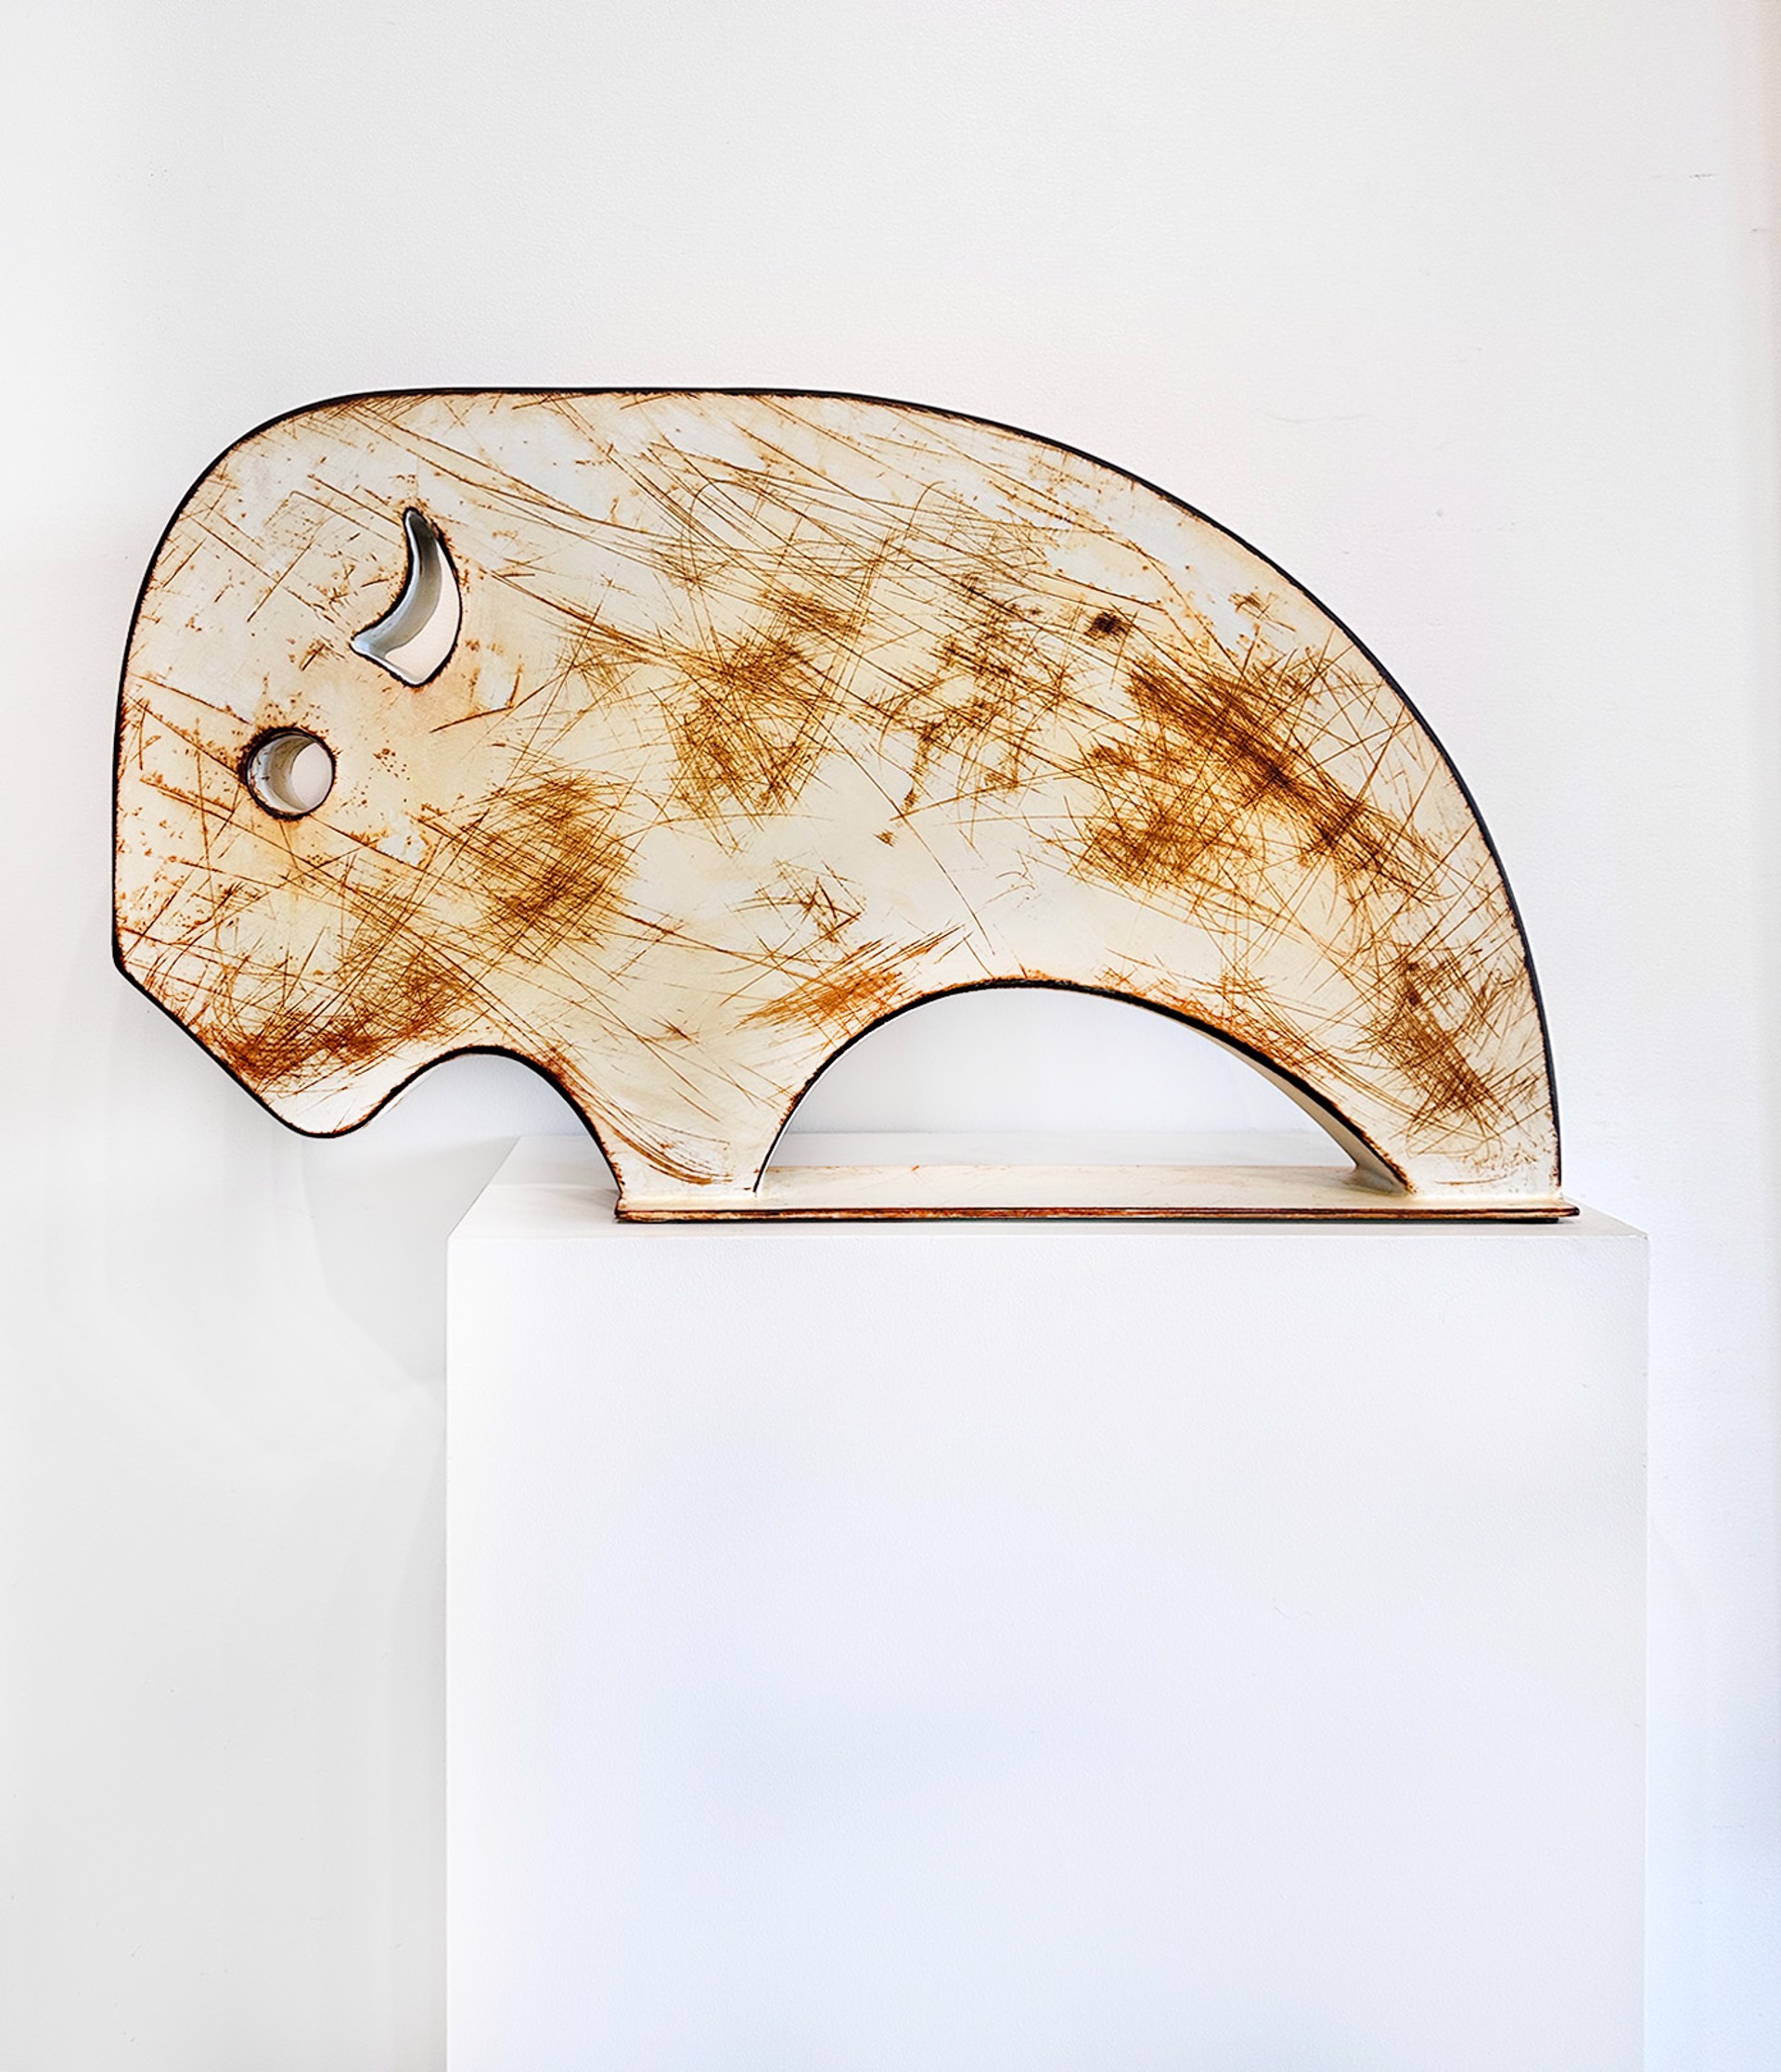 Steel Sculpture Of A Walking Bison In Simplified Shapes With White Rusted Finish